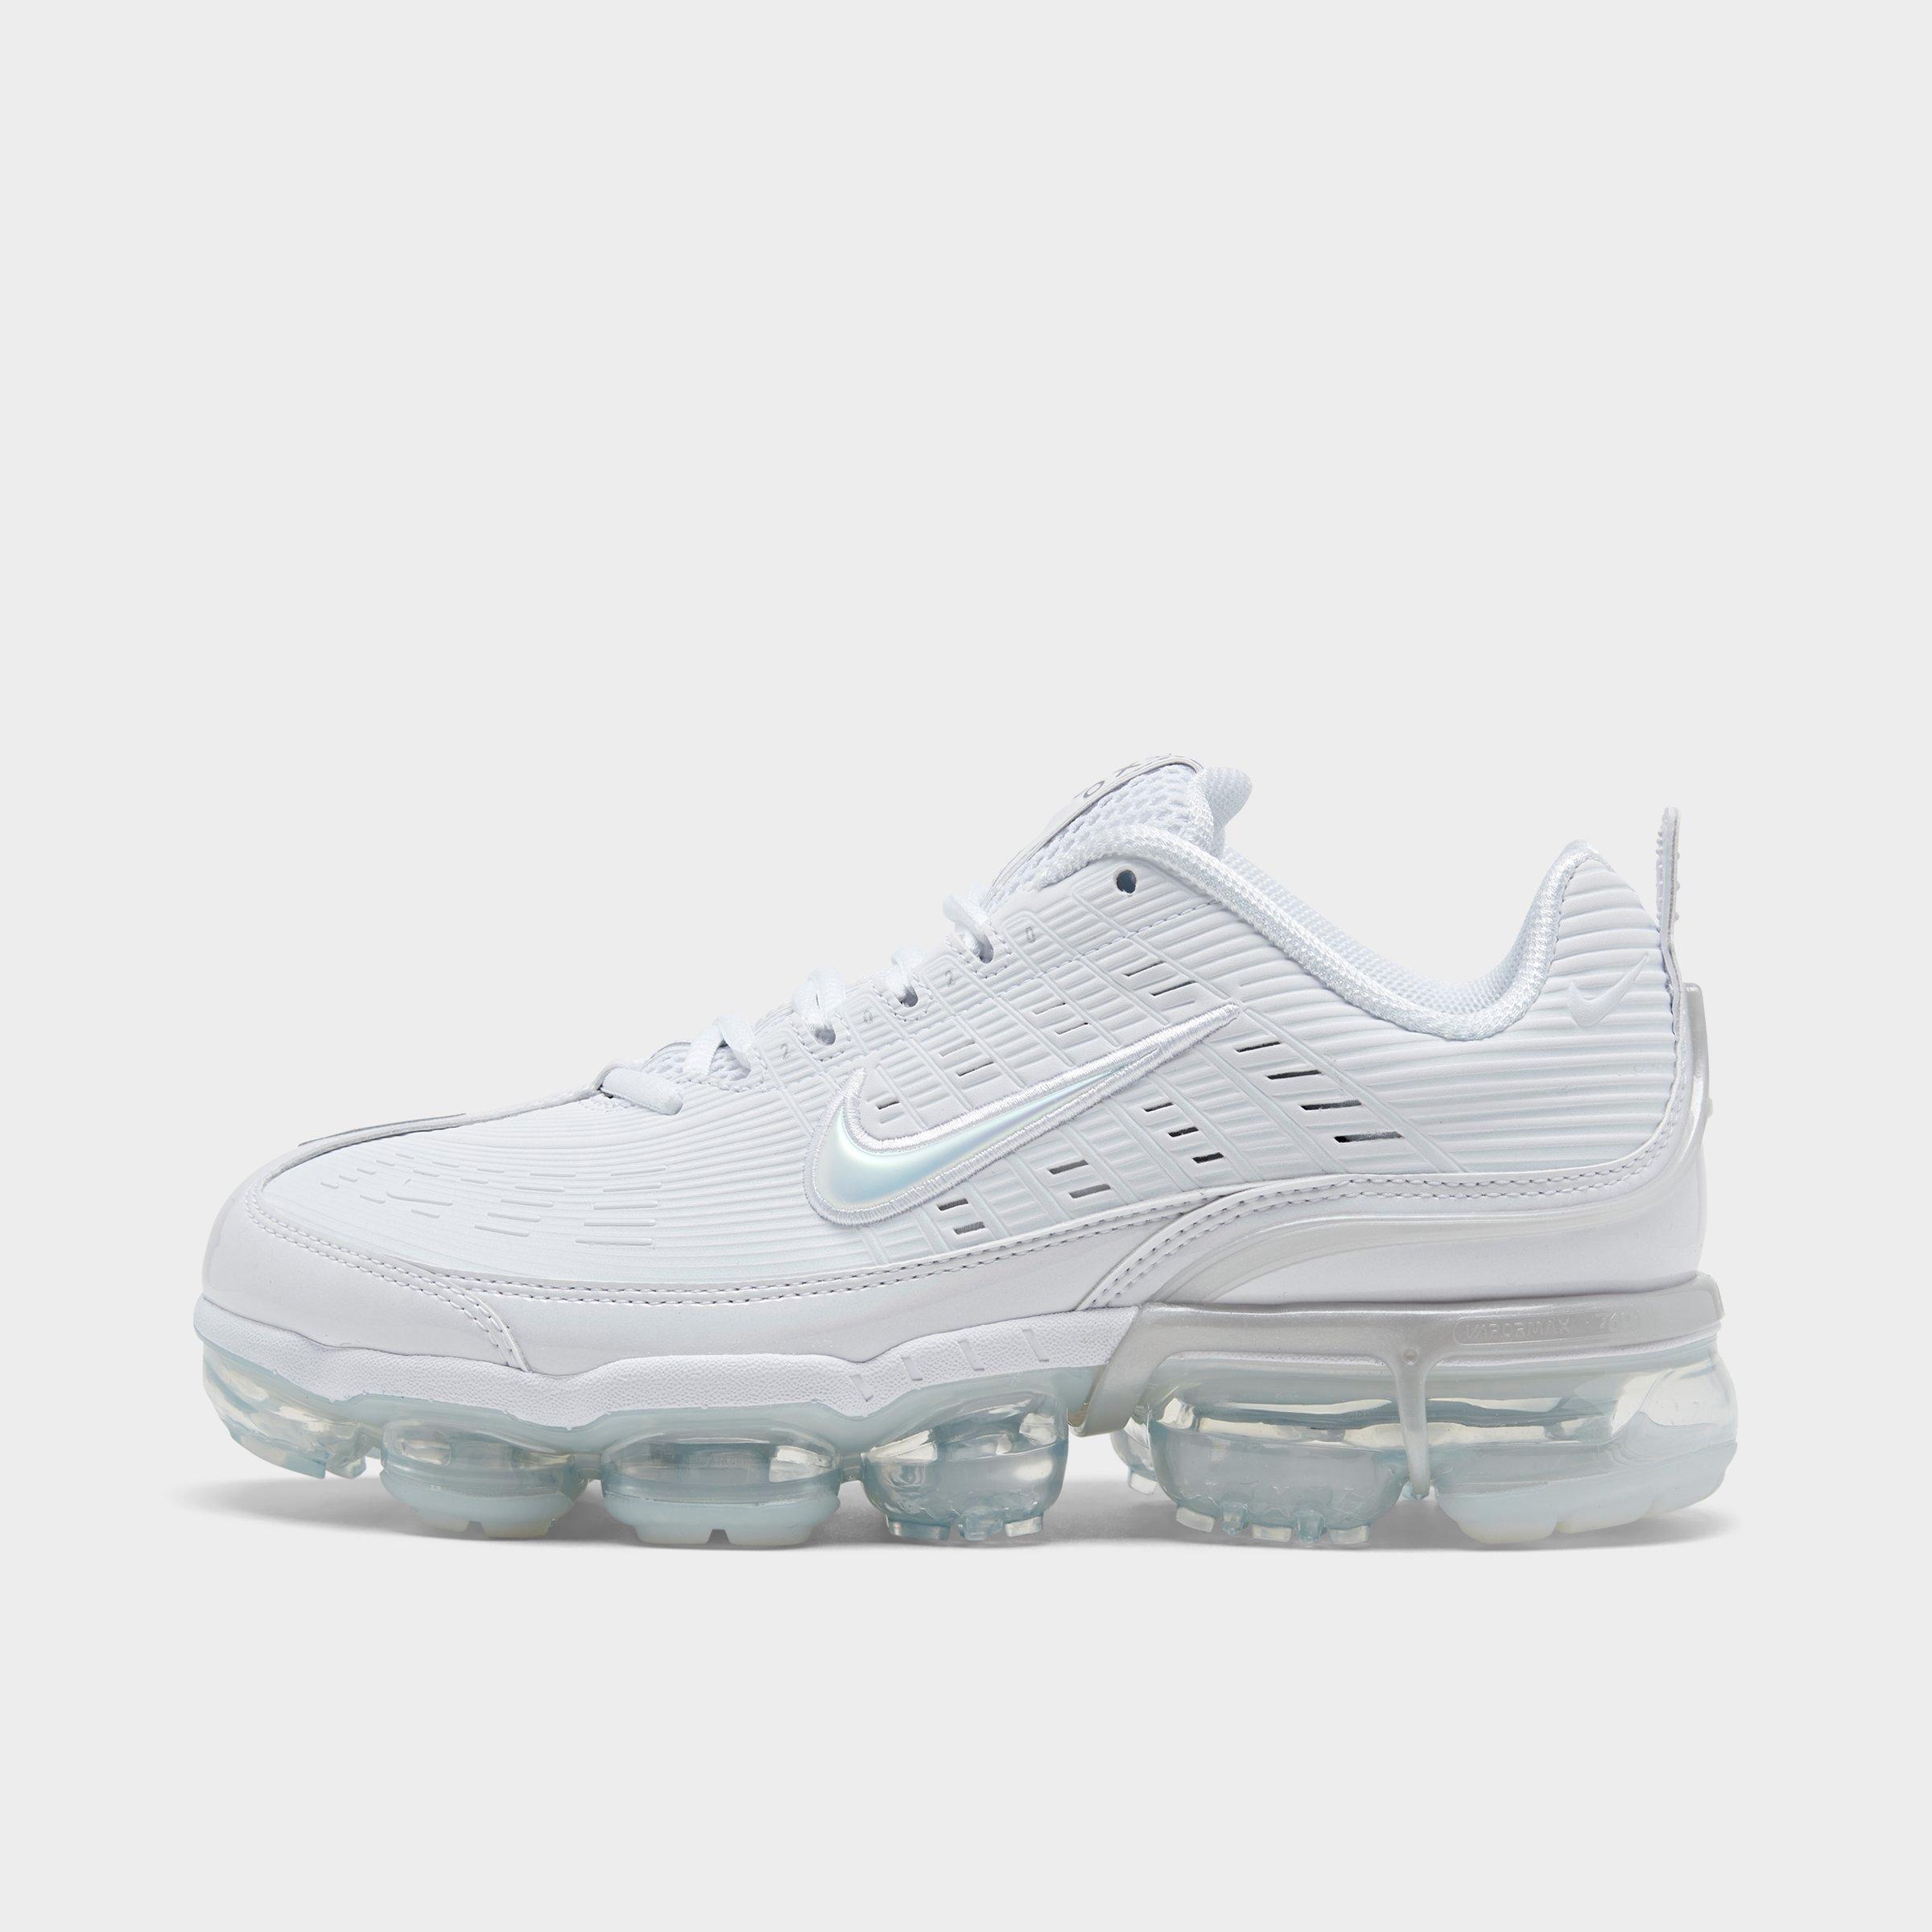 cheapest place to buy vapormax